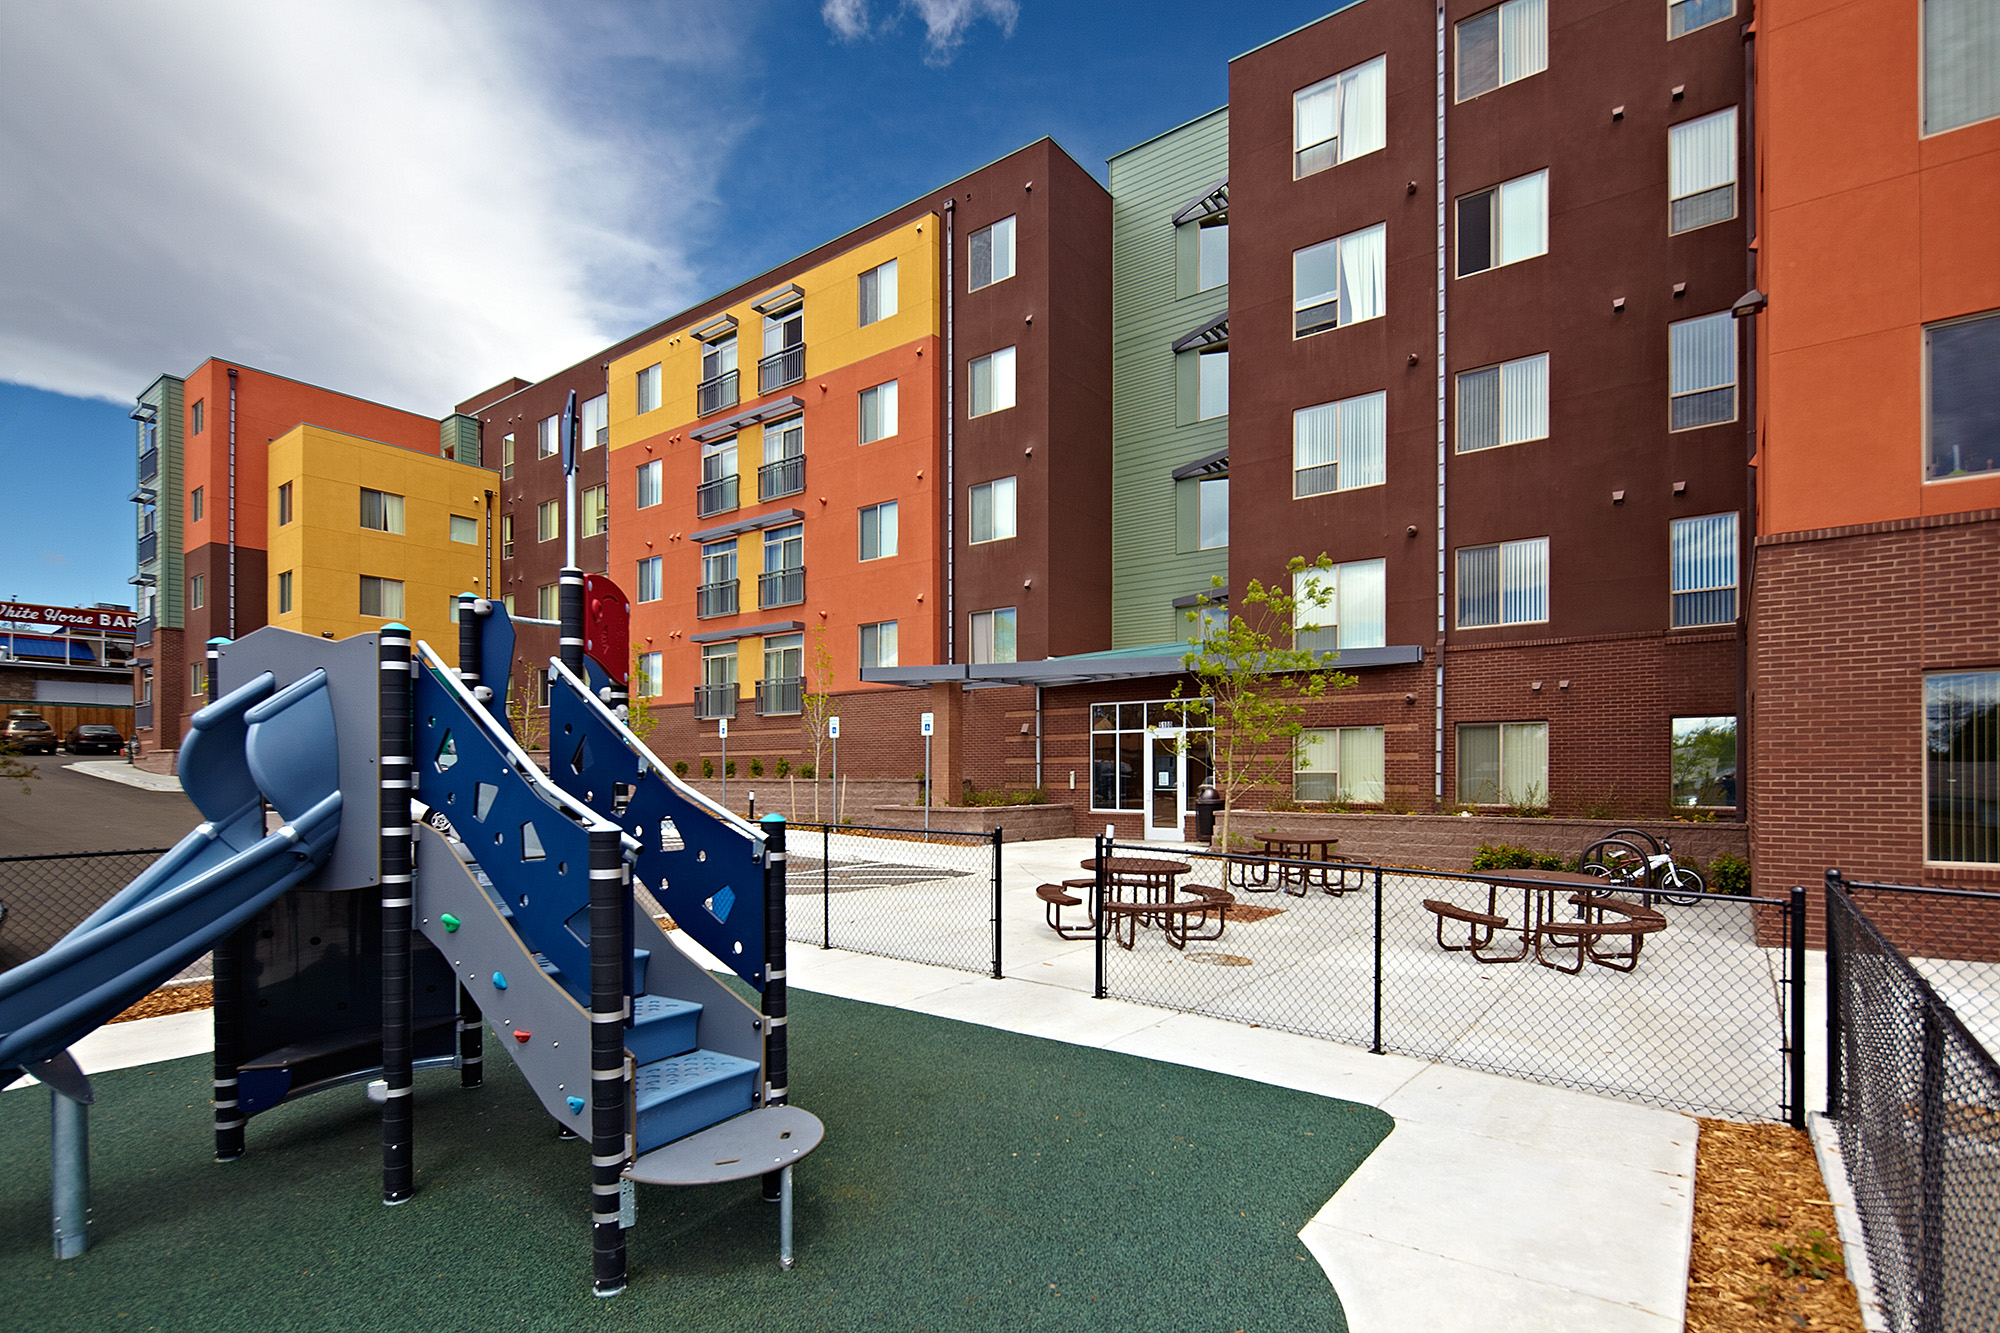 5 storey apartment building with windows overlooking playground and picnic seating